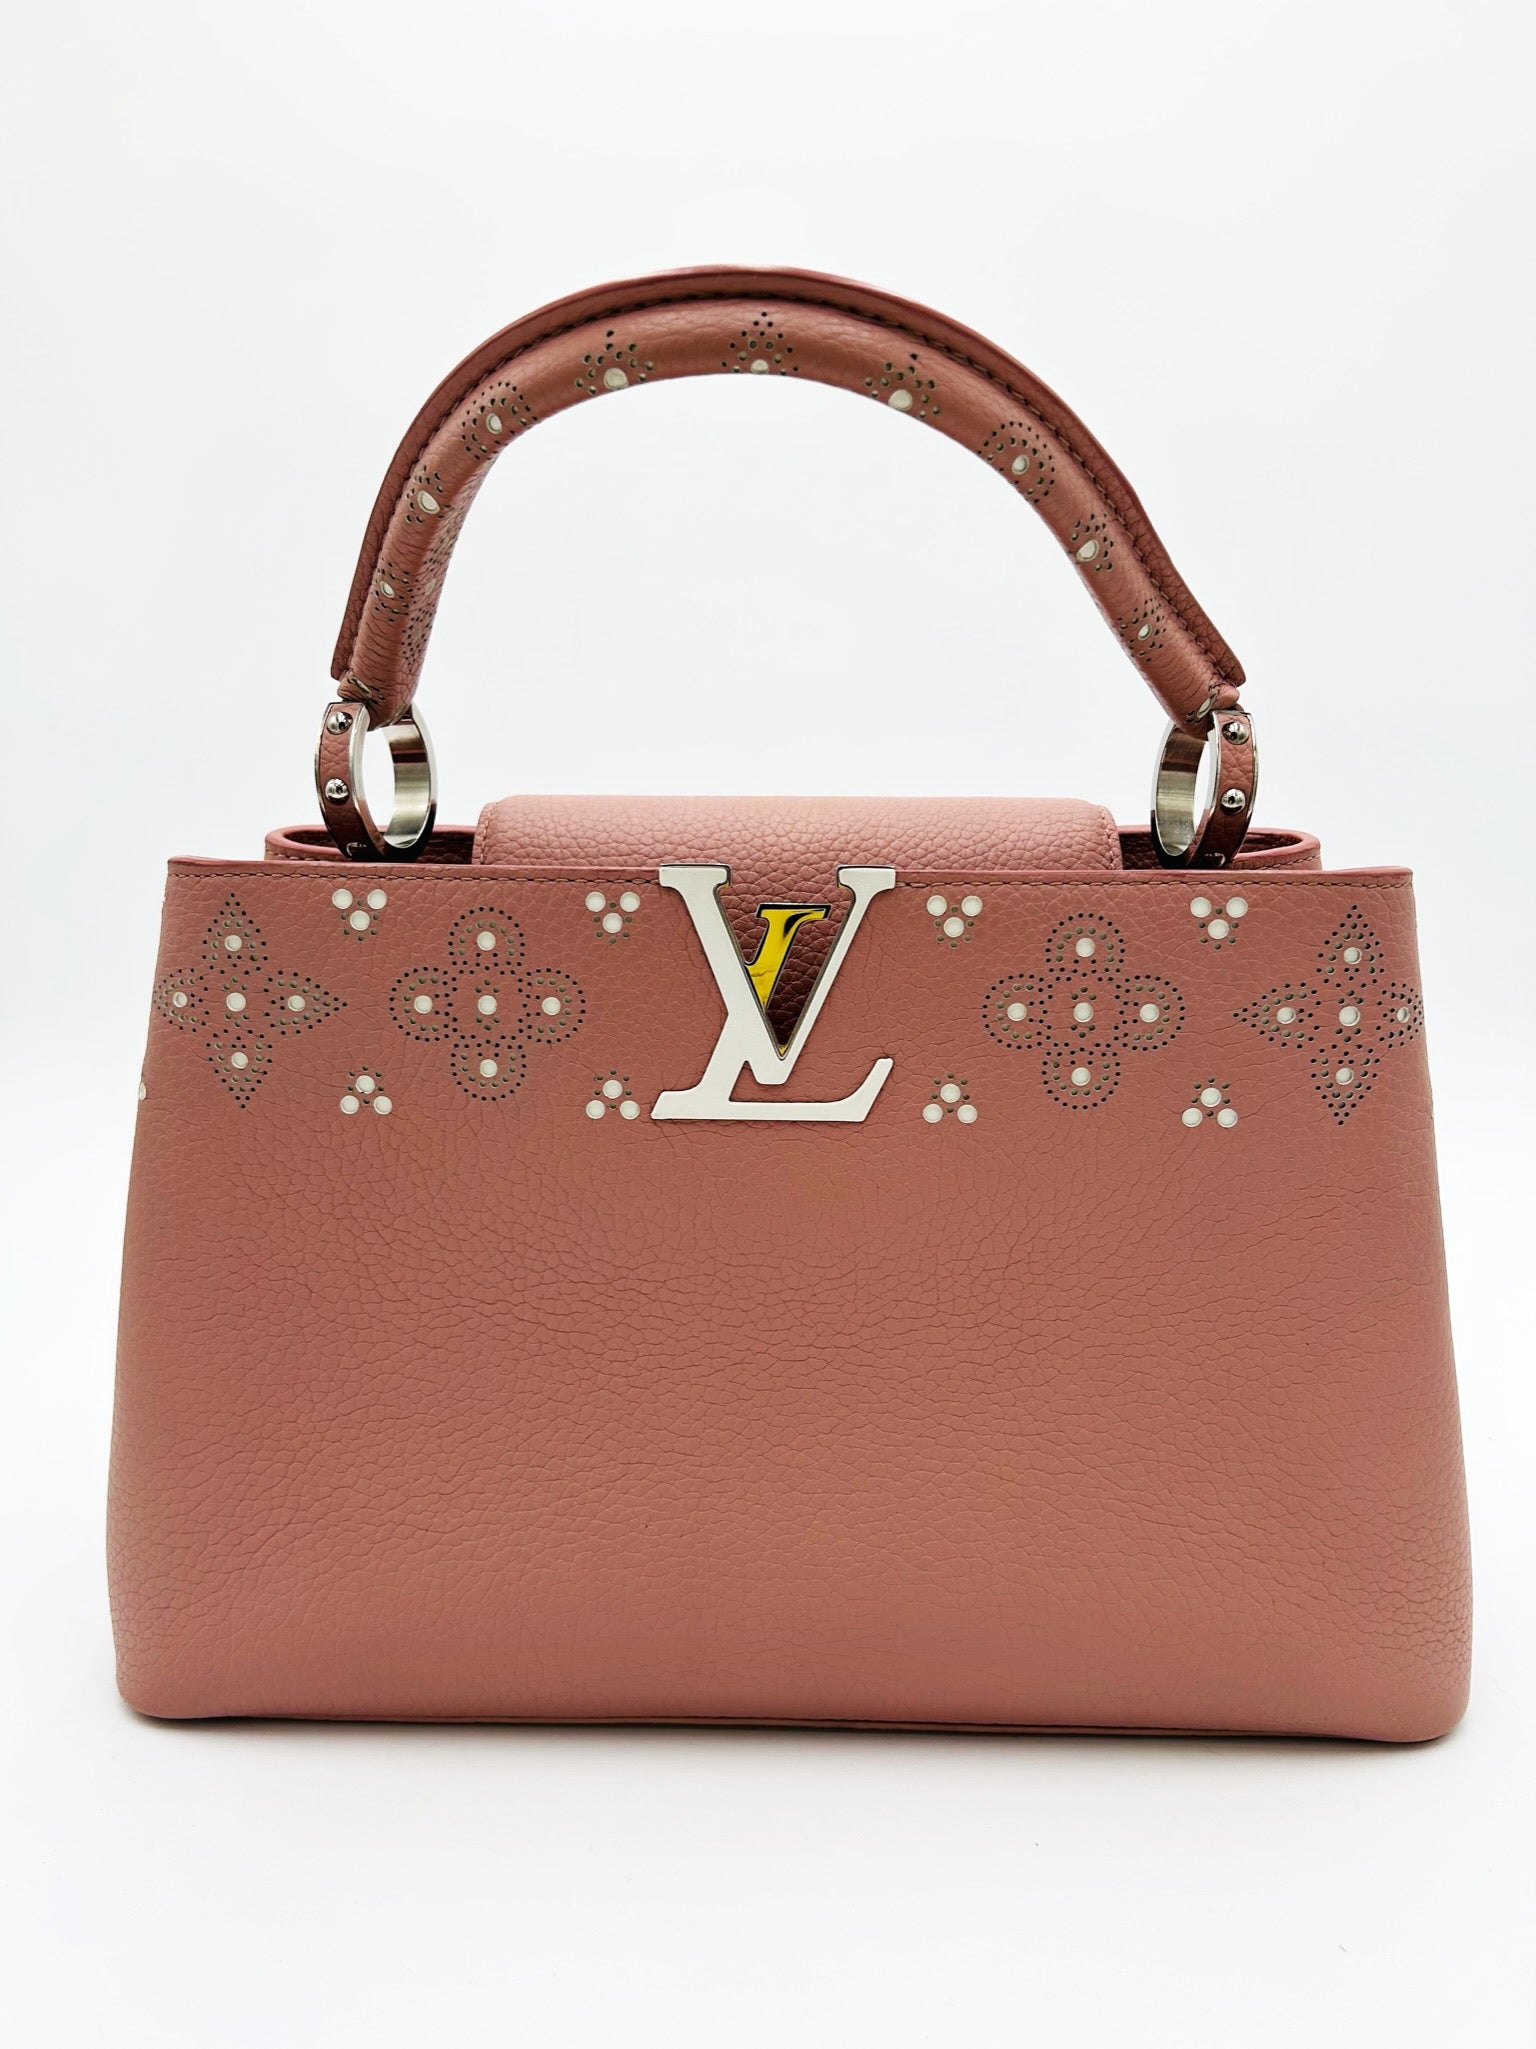 LV TAURILLON CAPUCINES FADE PINK